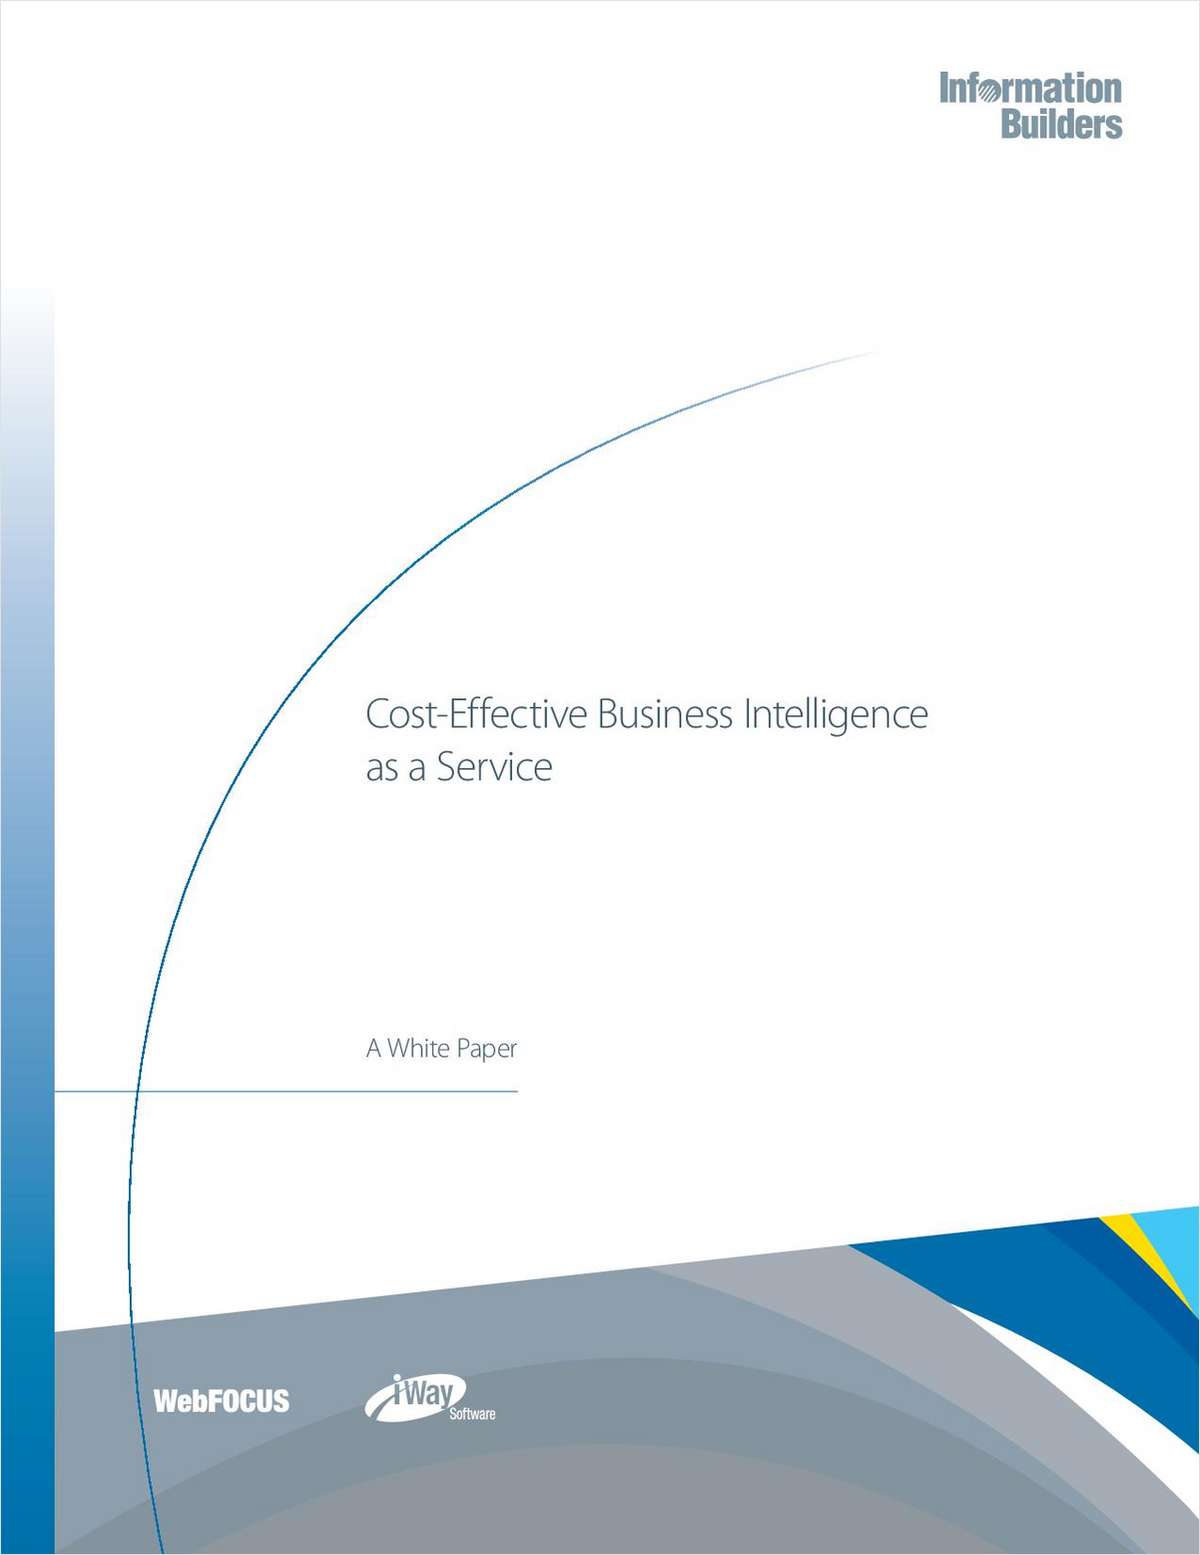 Cost-Effective Business Intelligence as a Service